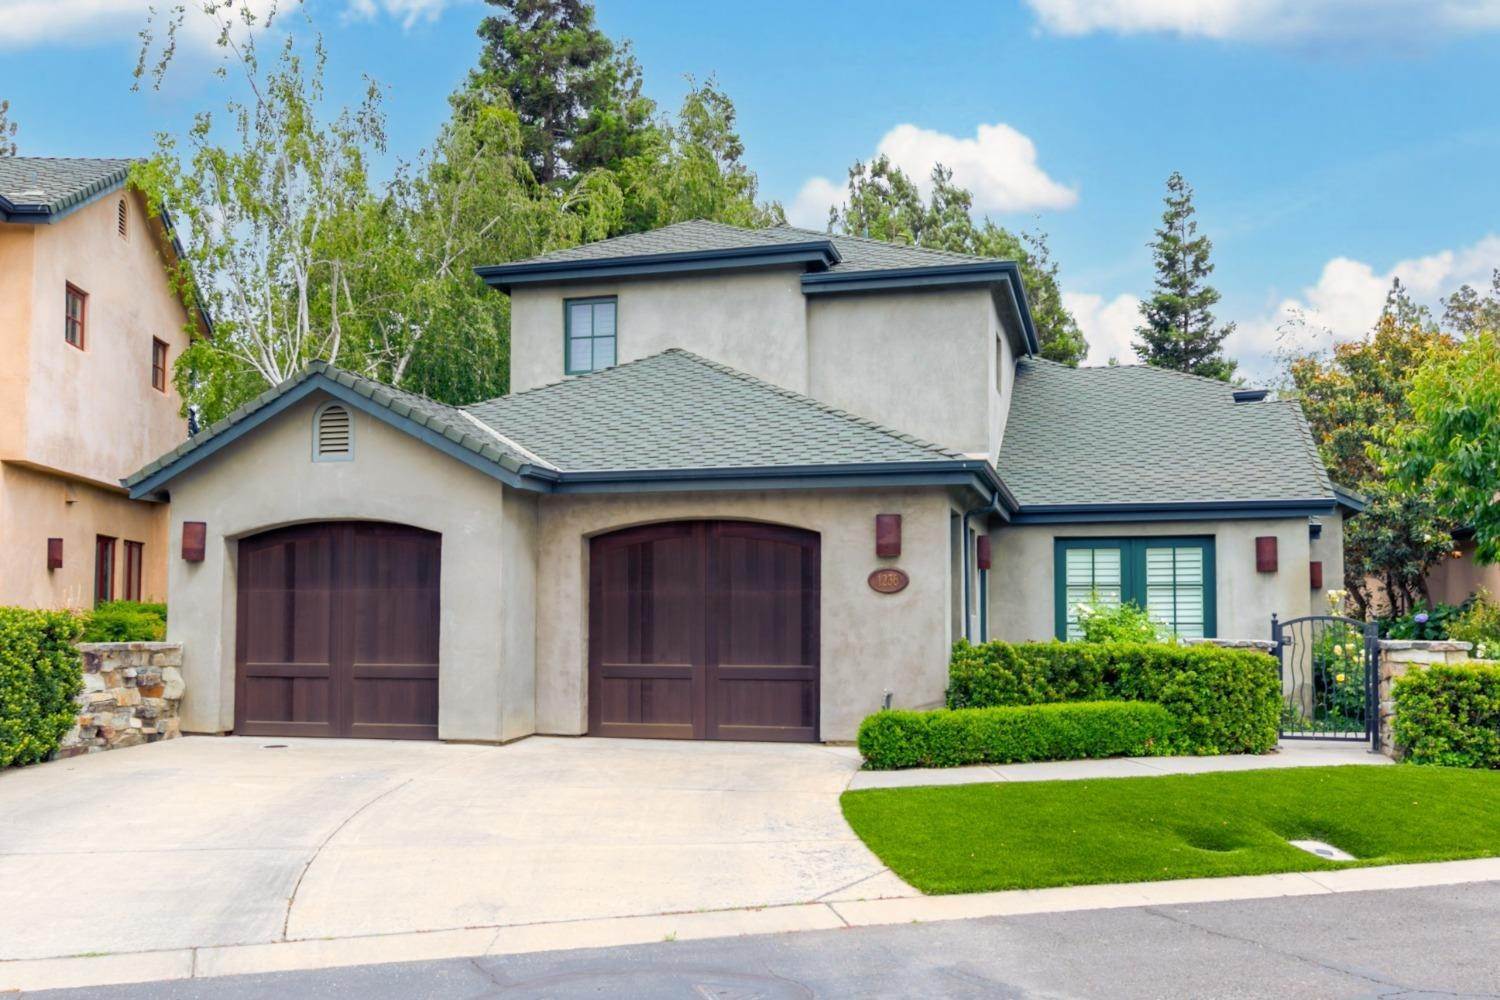 Single Family Homes for Active at 1236 Winerose Court Lodi, California 95242 United States